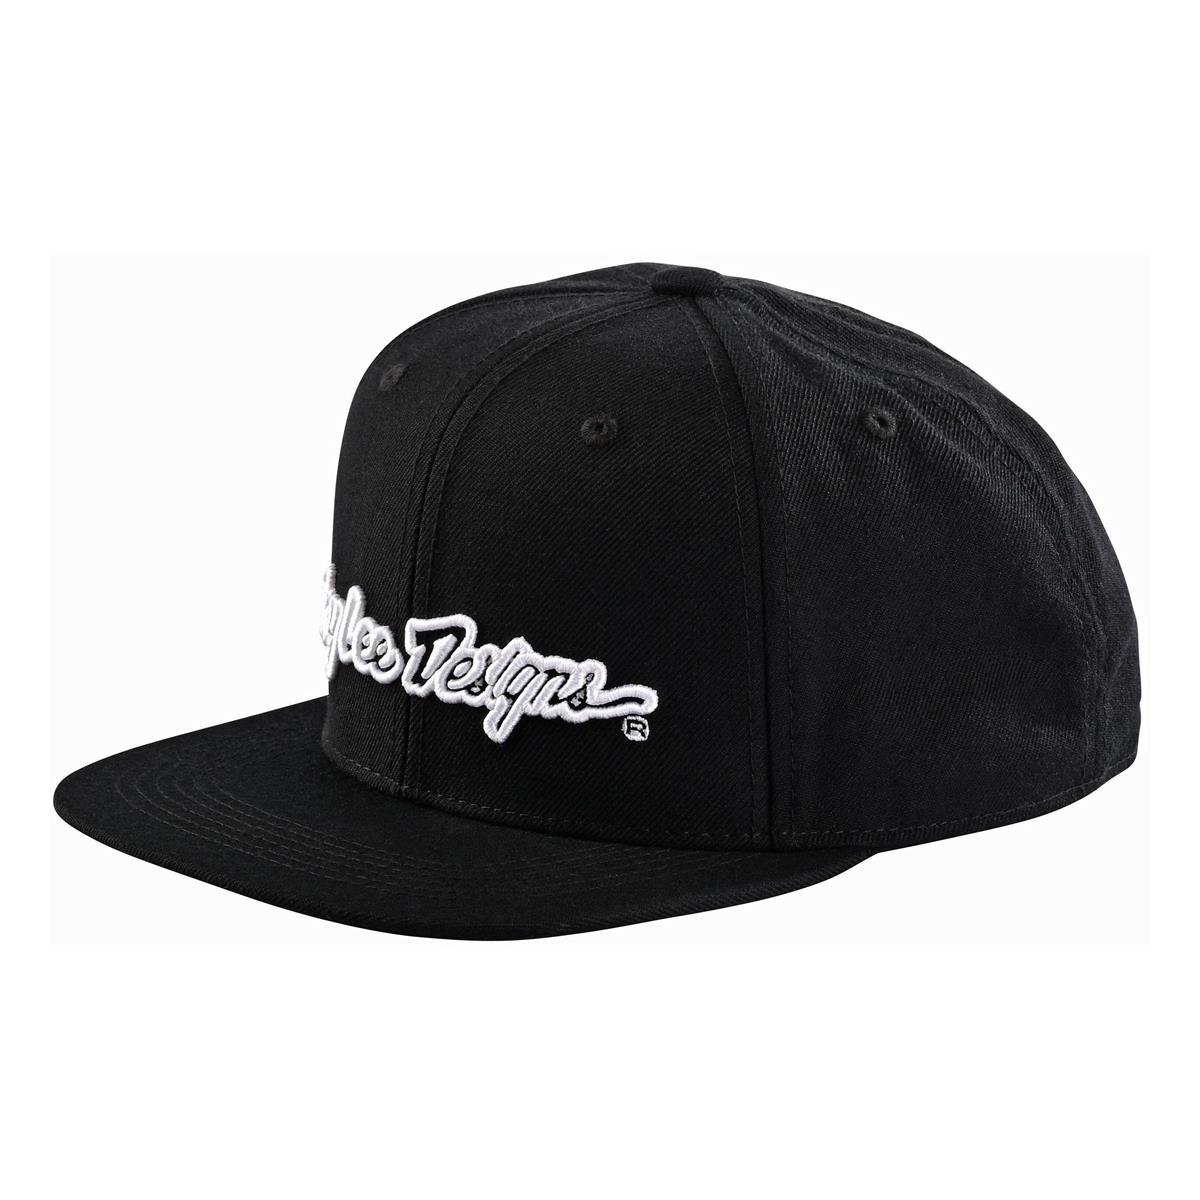 Troy Lee Designs 9Fifty Snapback Cap Signature Black/White